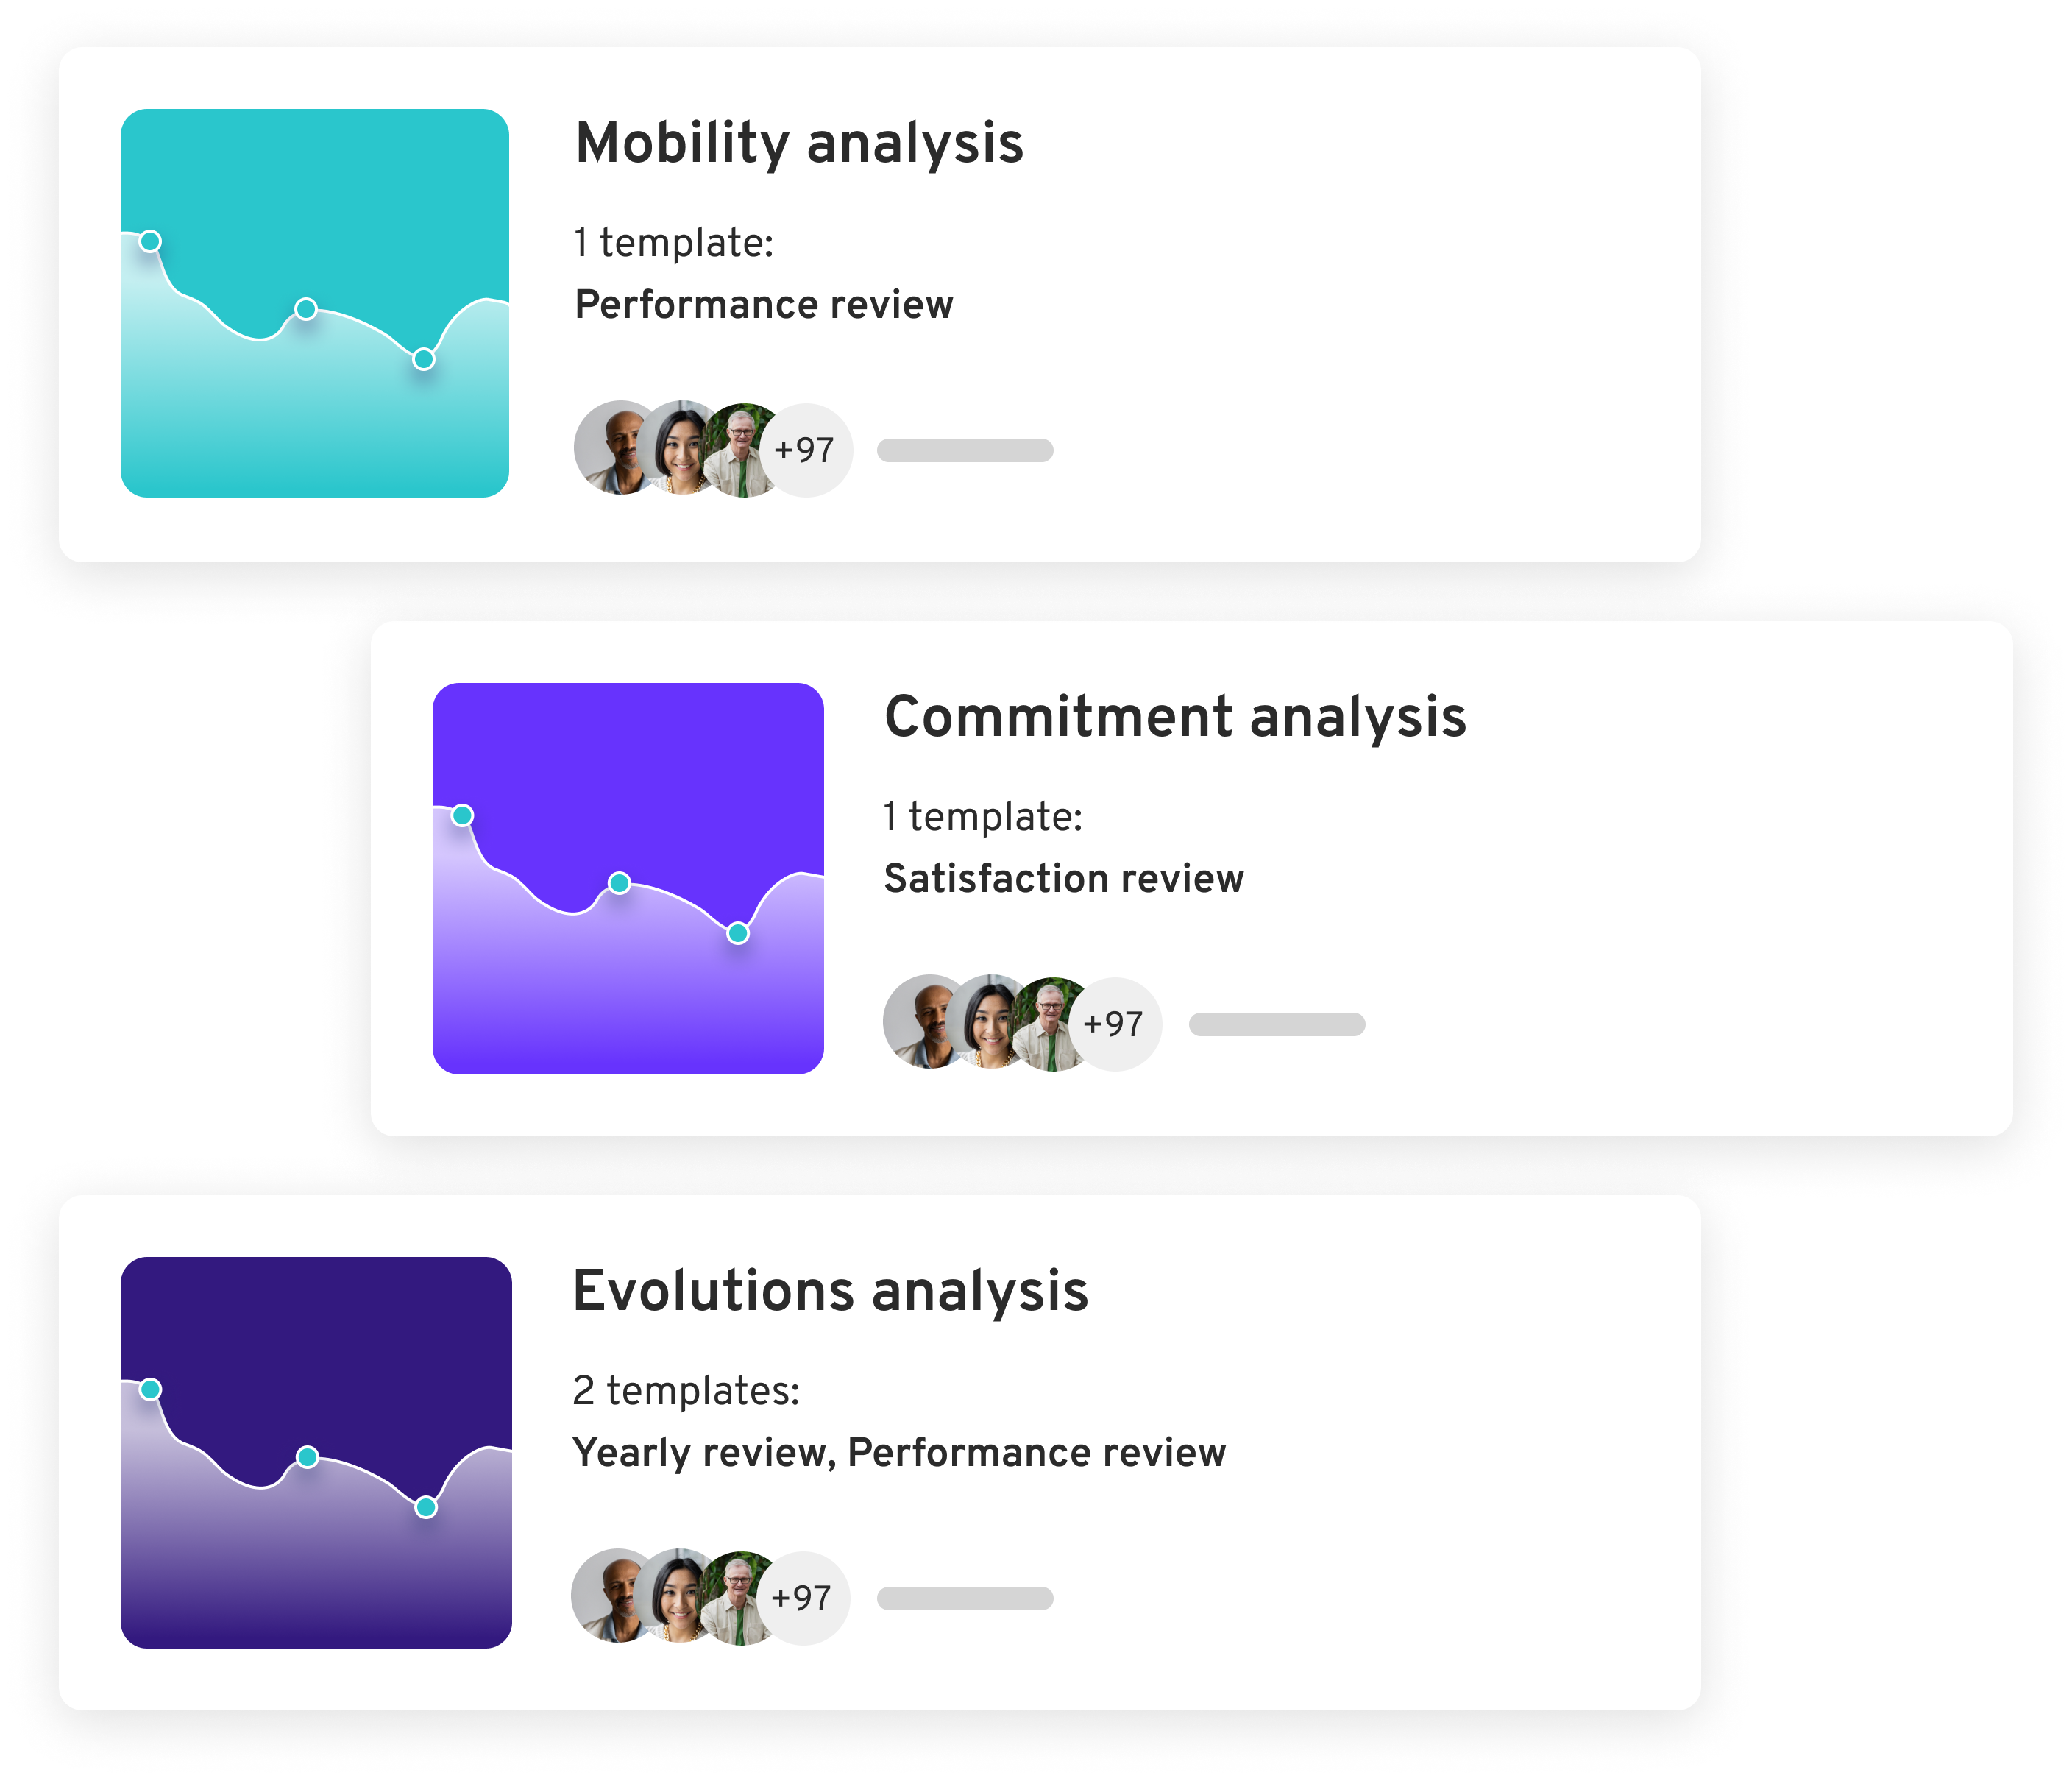 Track and analyze your annual review campaigns